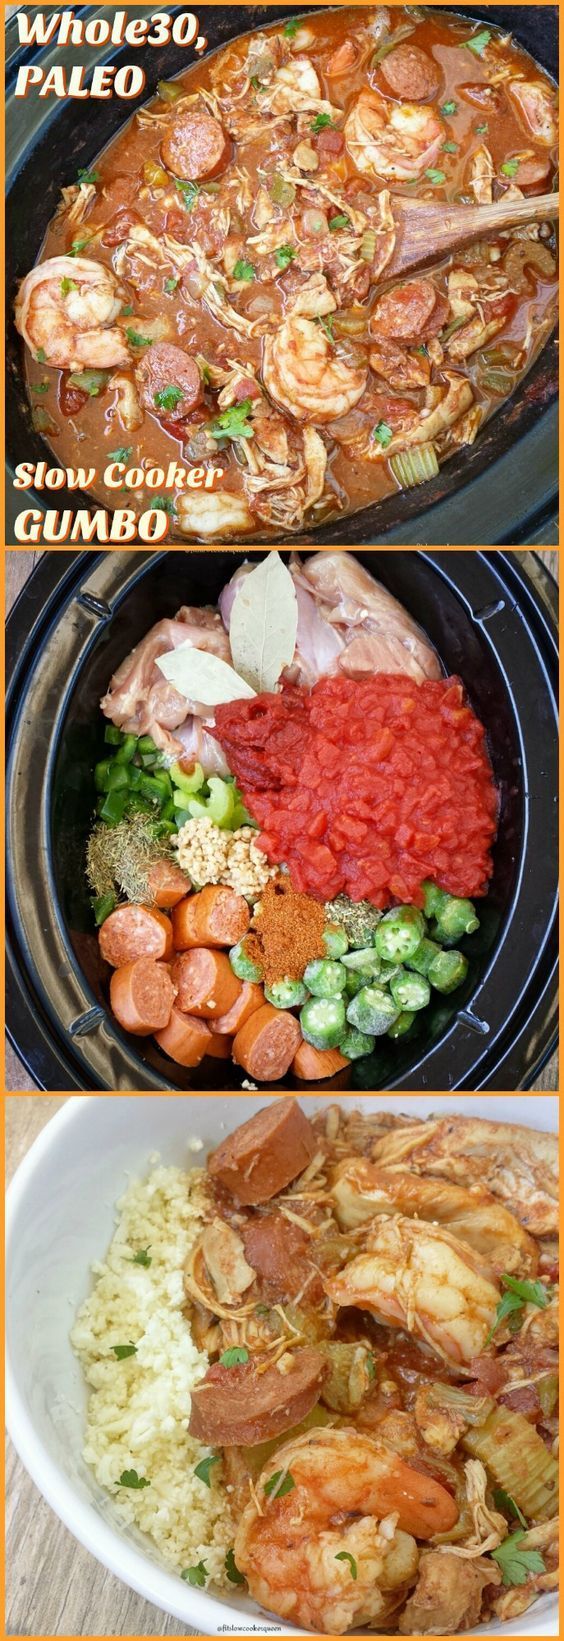 Crockpot / Slow Cooker whole30 paleo – Packed with Creole and Cajun flavors, this easy gumbo recipe is sure to please. Not just